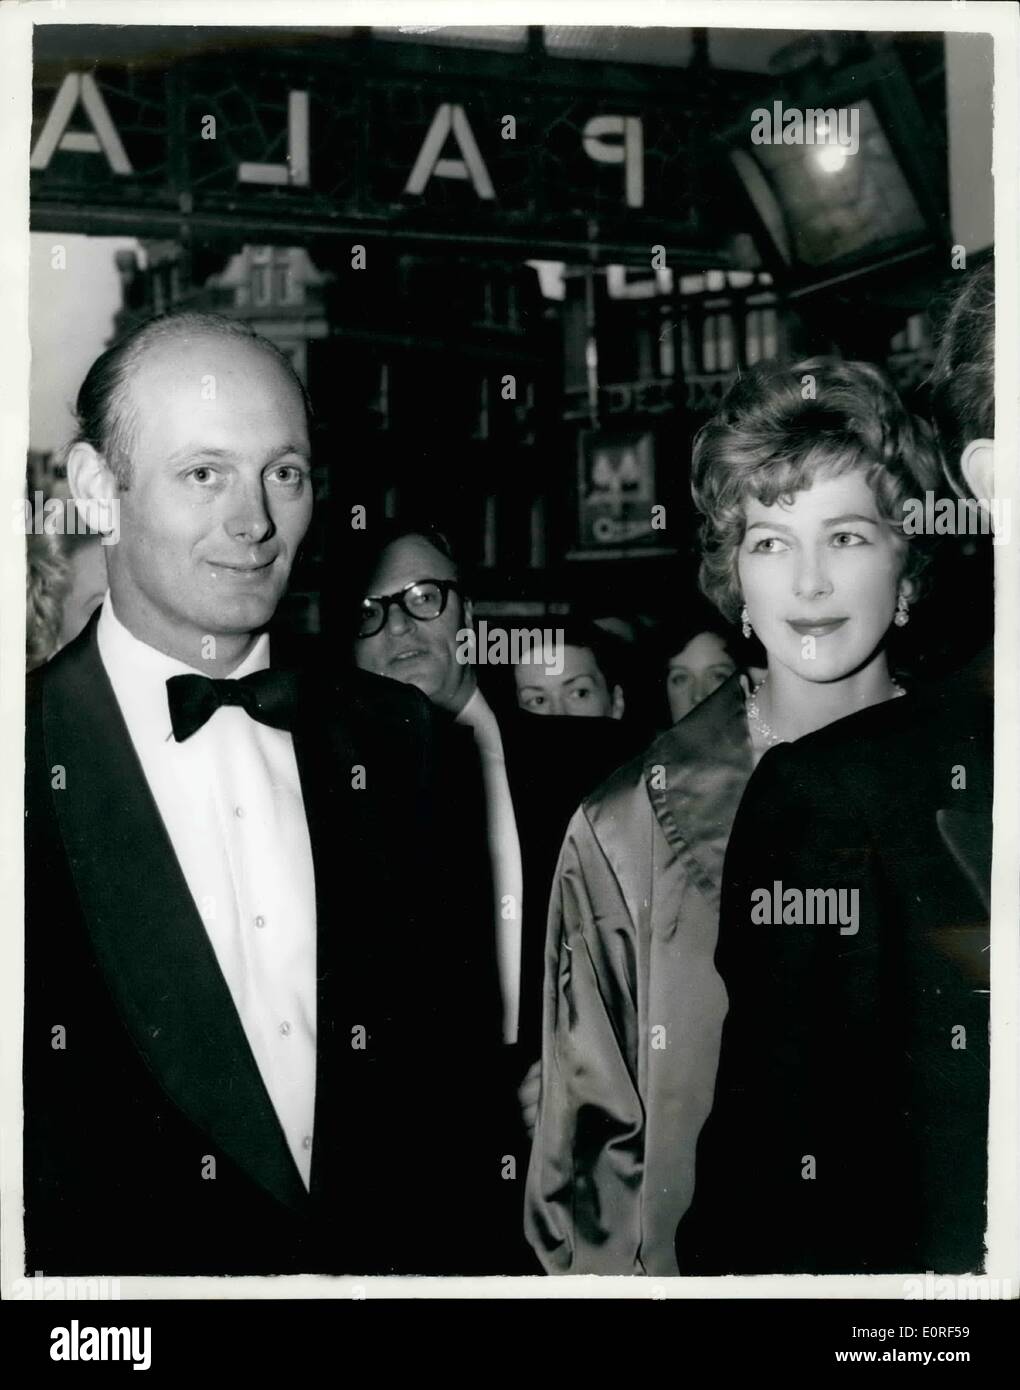 May 05, 1959 - John Osborne's new musical is booed at the first night.: Booes from the gallery and cheers from the stalls greeted John Osborne's new musical '' The world of Paul Slickey'', at the palace theatre, London, last night. Photo shows Newly-weds lord and lady Montague, just back from their honeymoon, turned up for the first night. Stock Photo